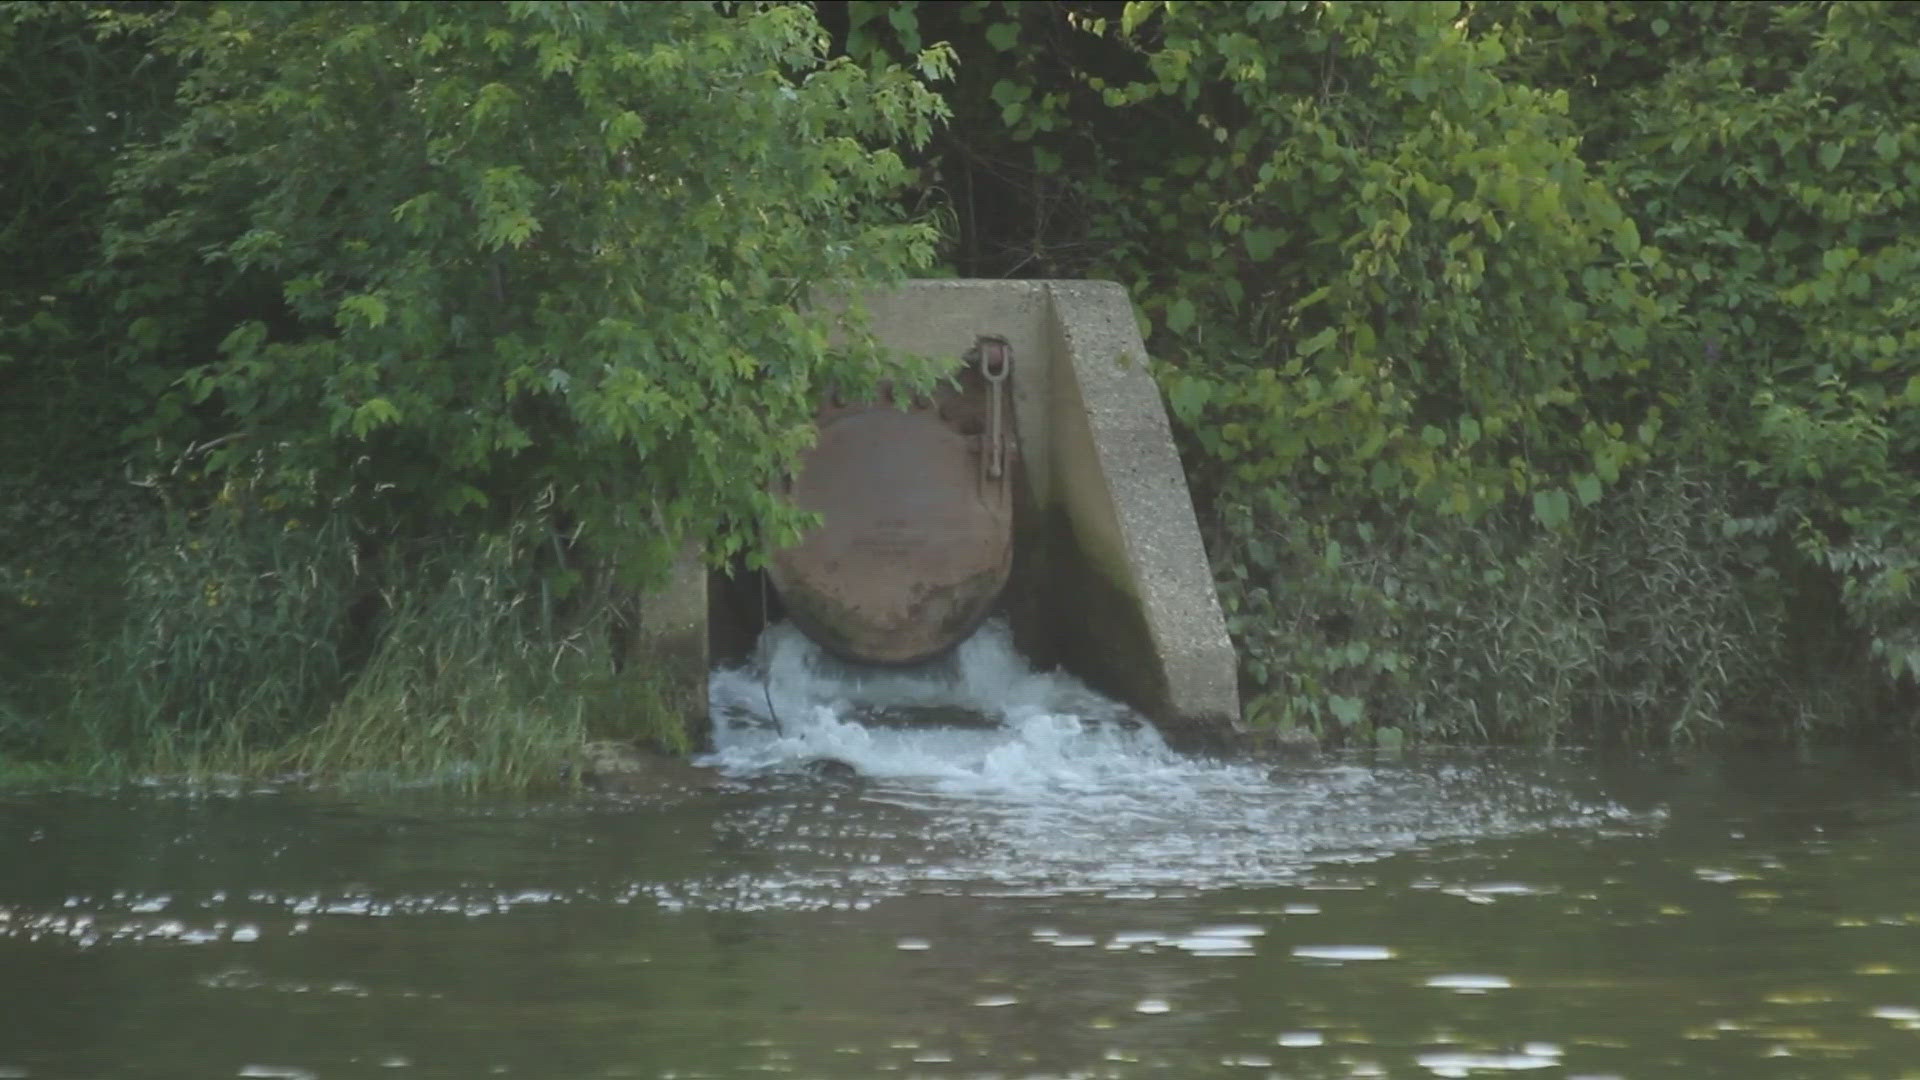 The Seneca Nation is saying that the city of Olean is not doing enough to stop sewage from being discharged into the Allegany River.